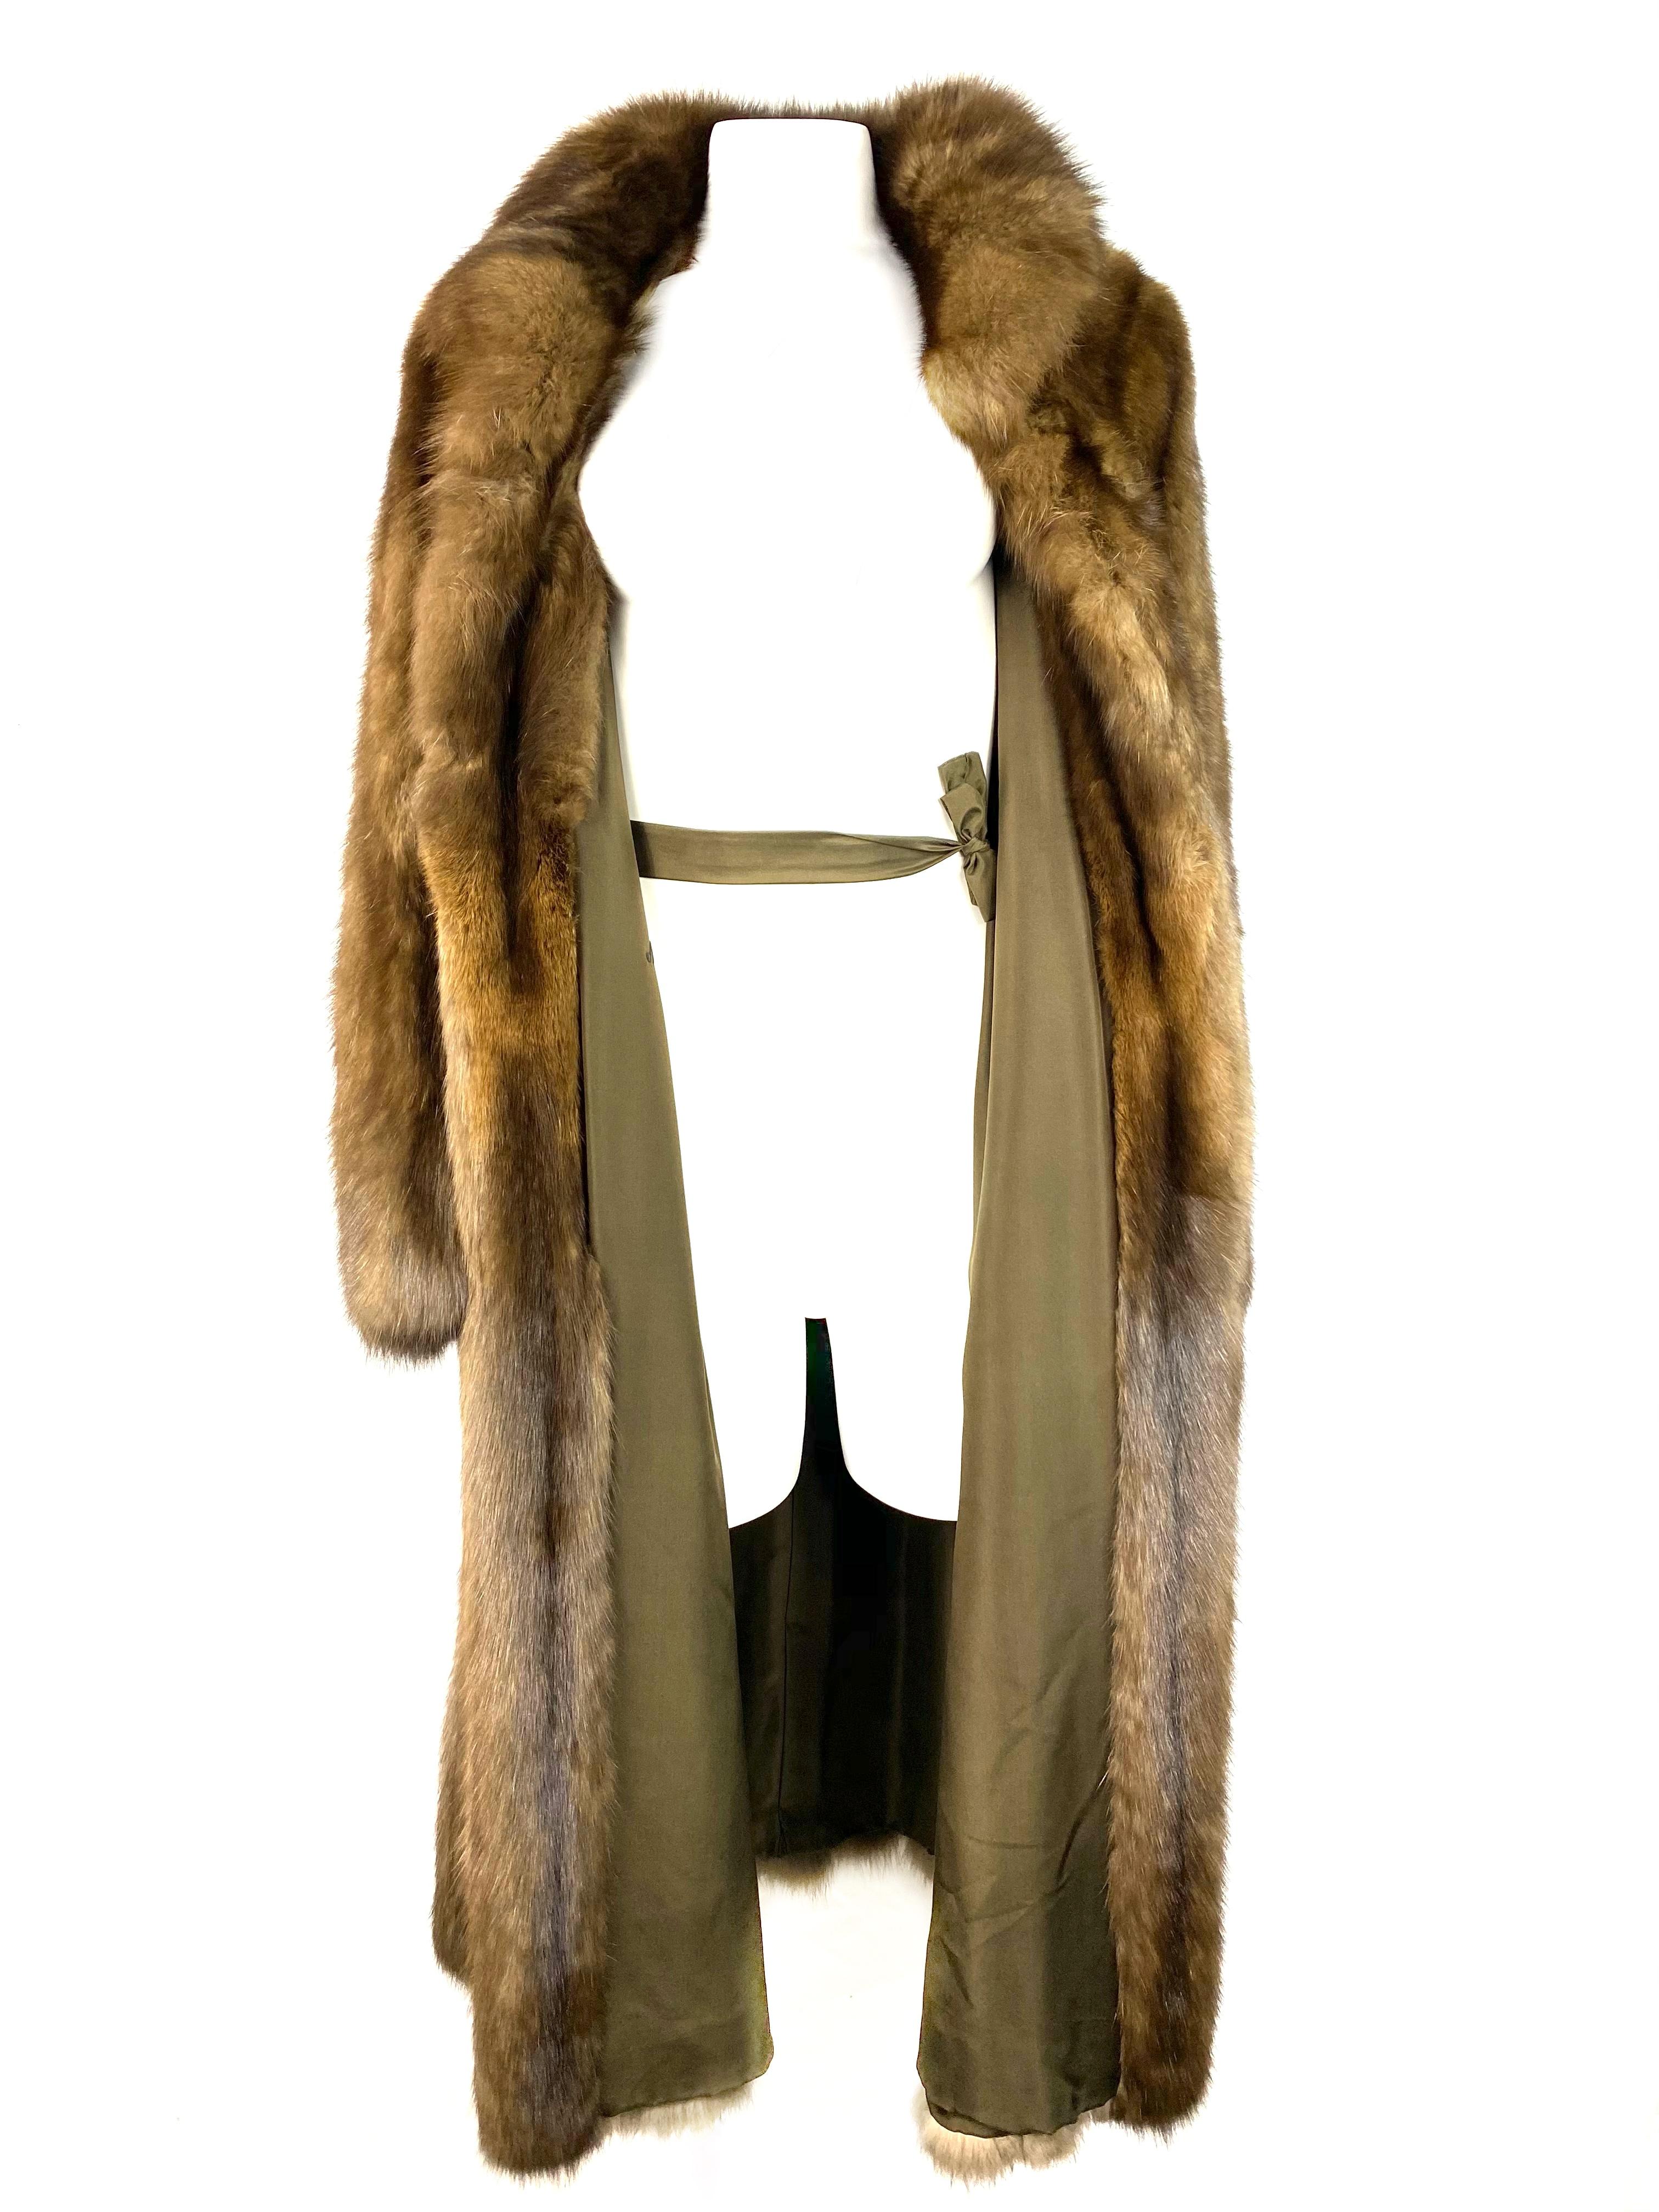 Revillon Paris- New York Sable Fur Coat In Excellent Condition For Sale In Beverly Hills, CA